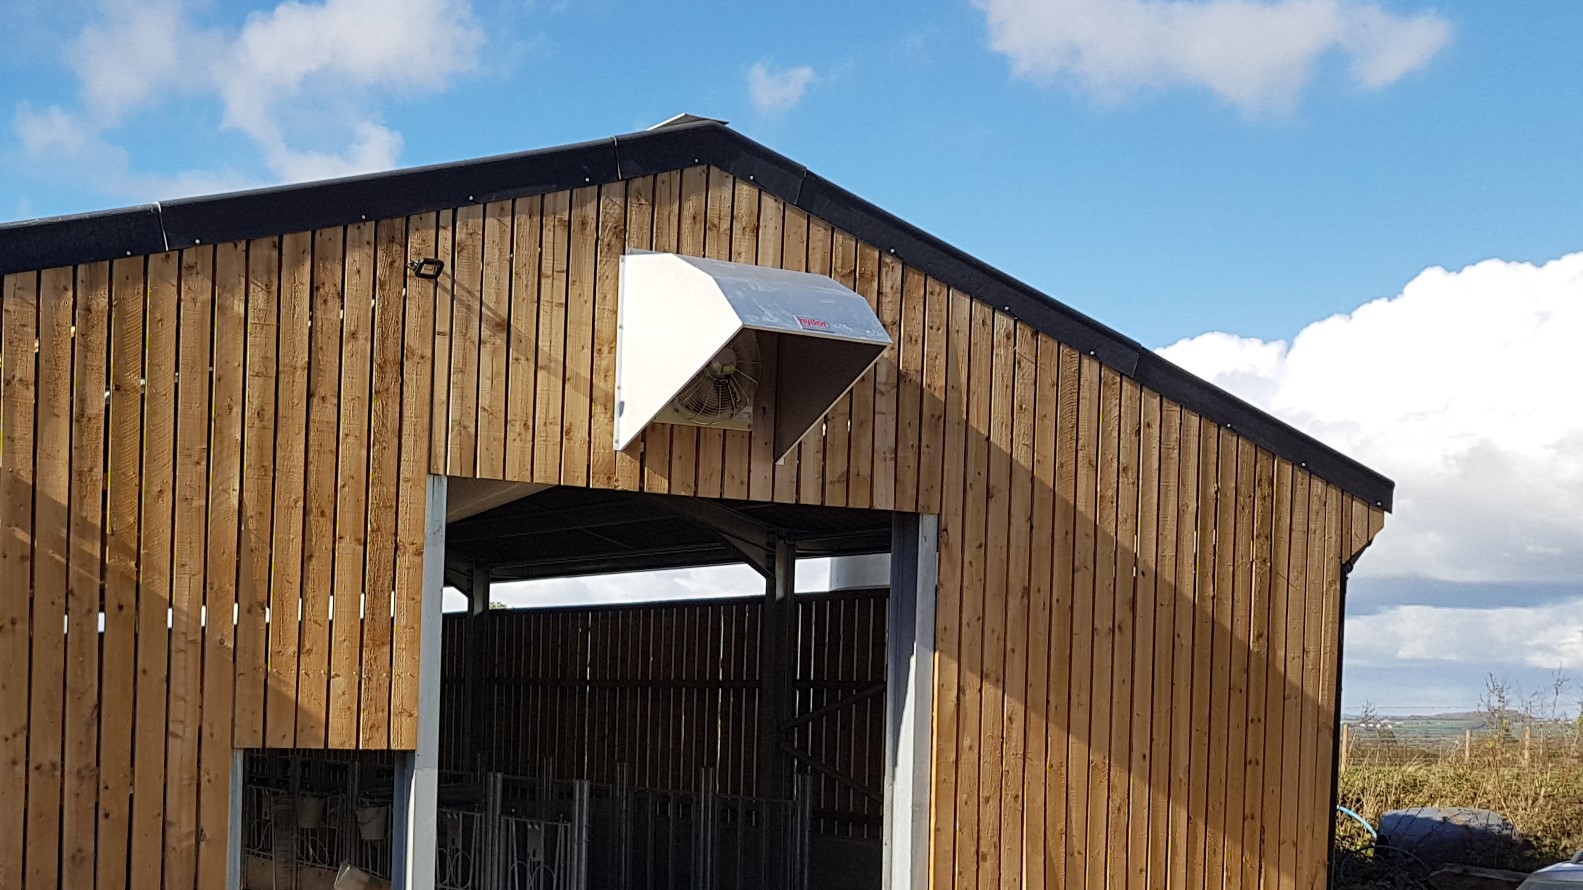 The external apex end of a shed. Showing a cowl pointing downwards positioned below the ridge.